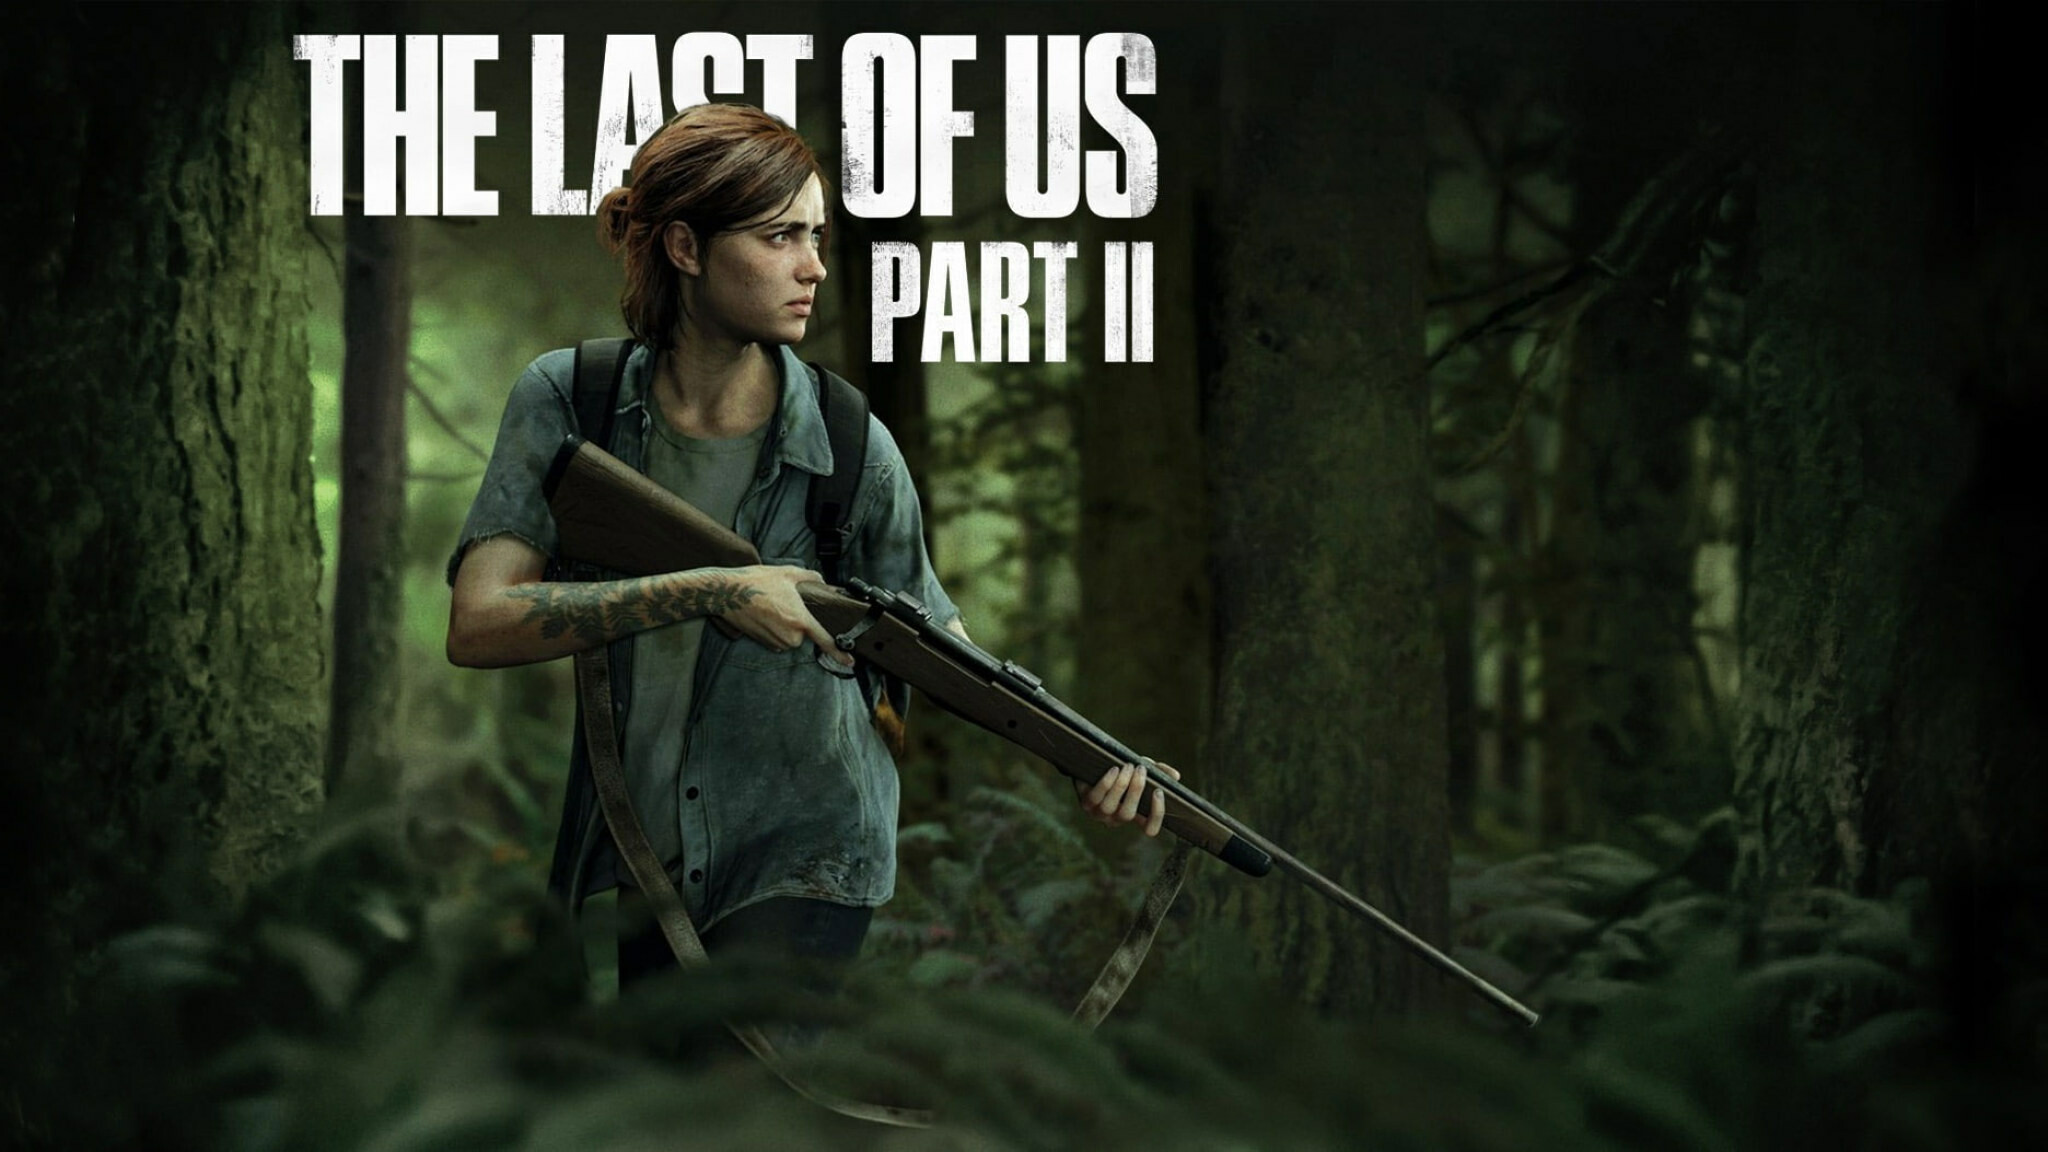 The Last of Us: At the 38th Golden Joystick Awards in November 2020, it won all six awards for which it was nominated: Ultimate Game of the Year, Best Audio, Best Storytelling, Best Visual Design, PlayStation Game of the Year, and Studio of the Year for Naughty Dog. 2050x1160 HD Background.